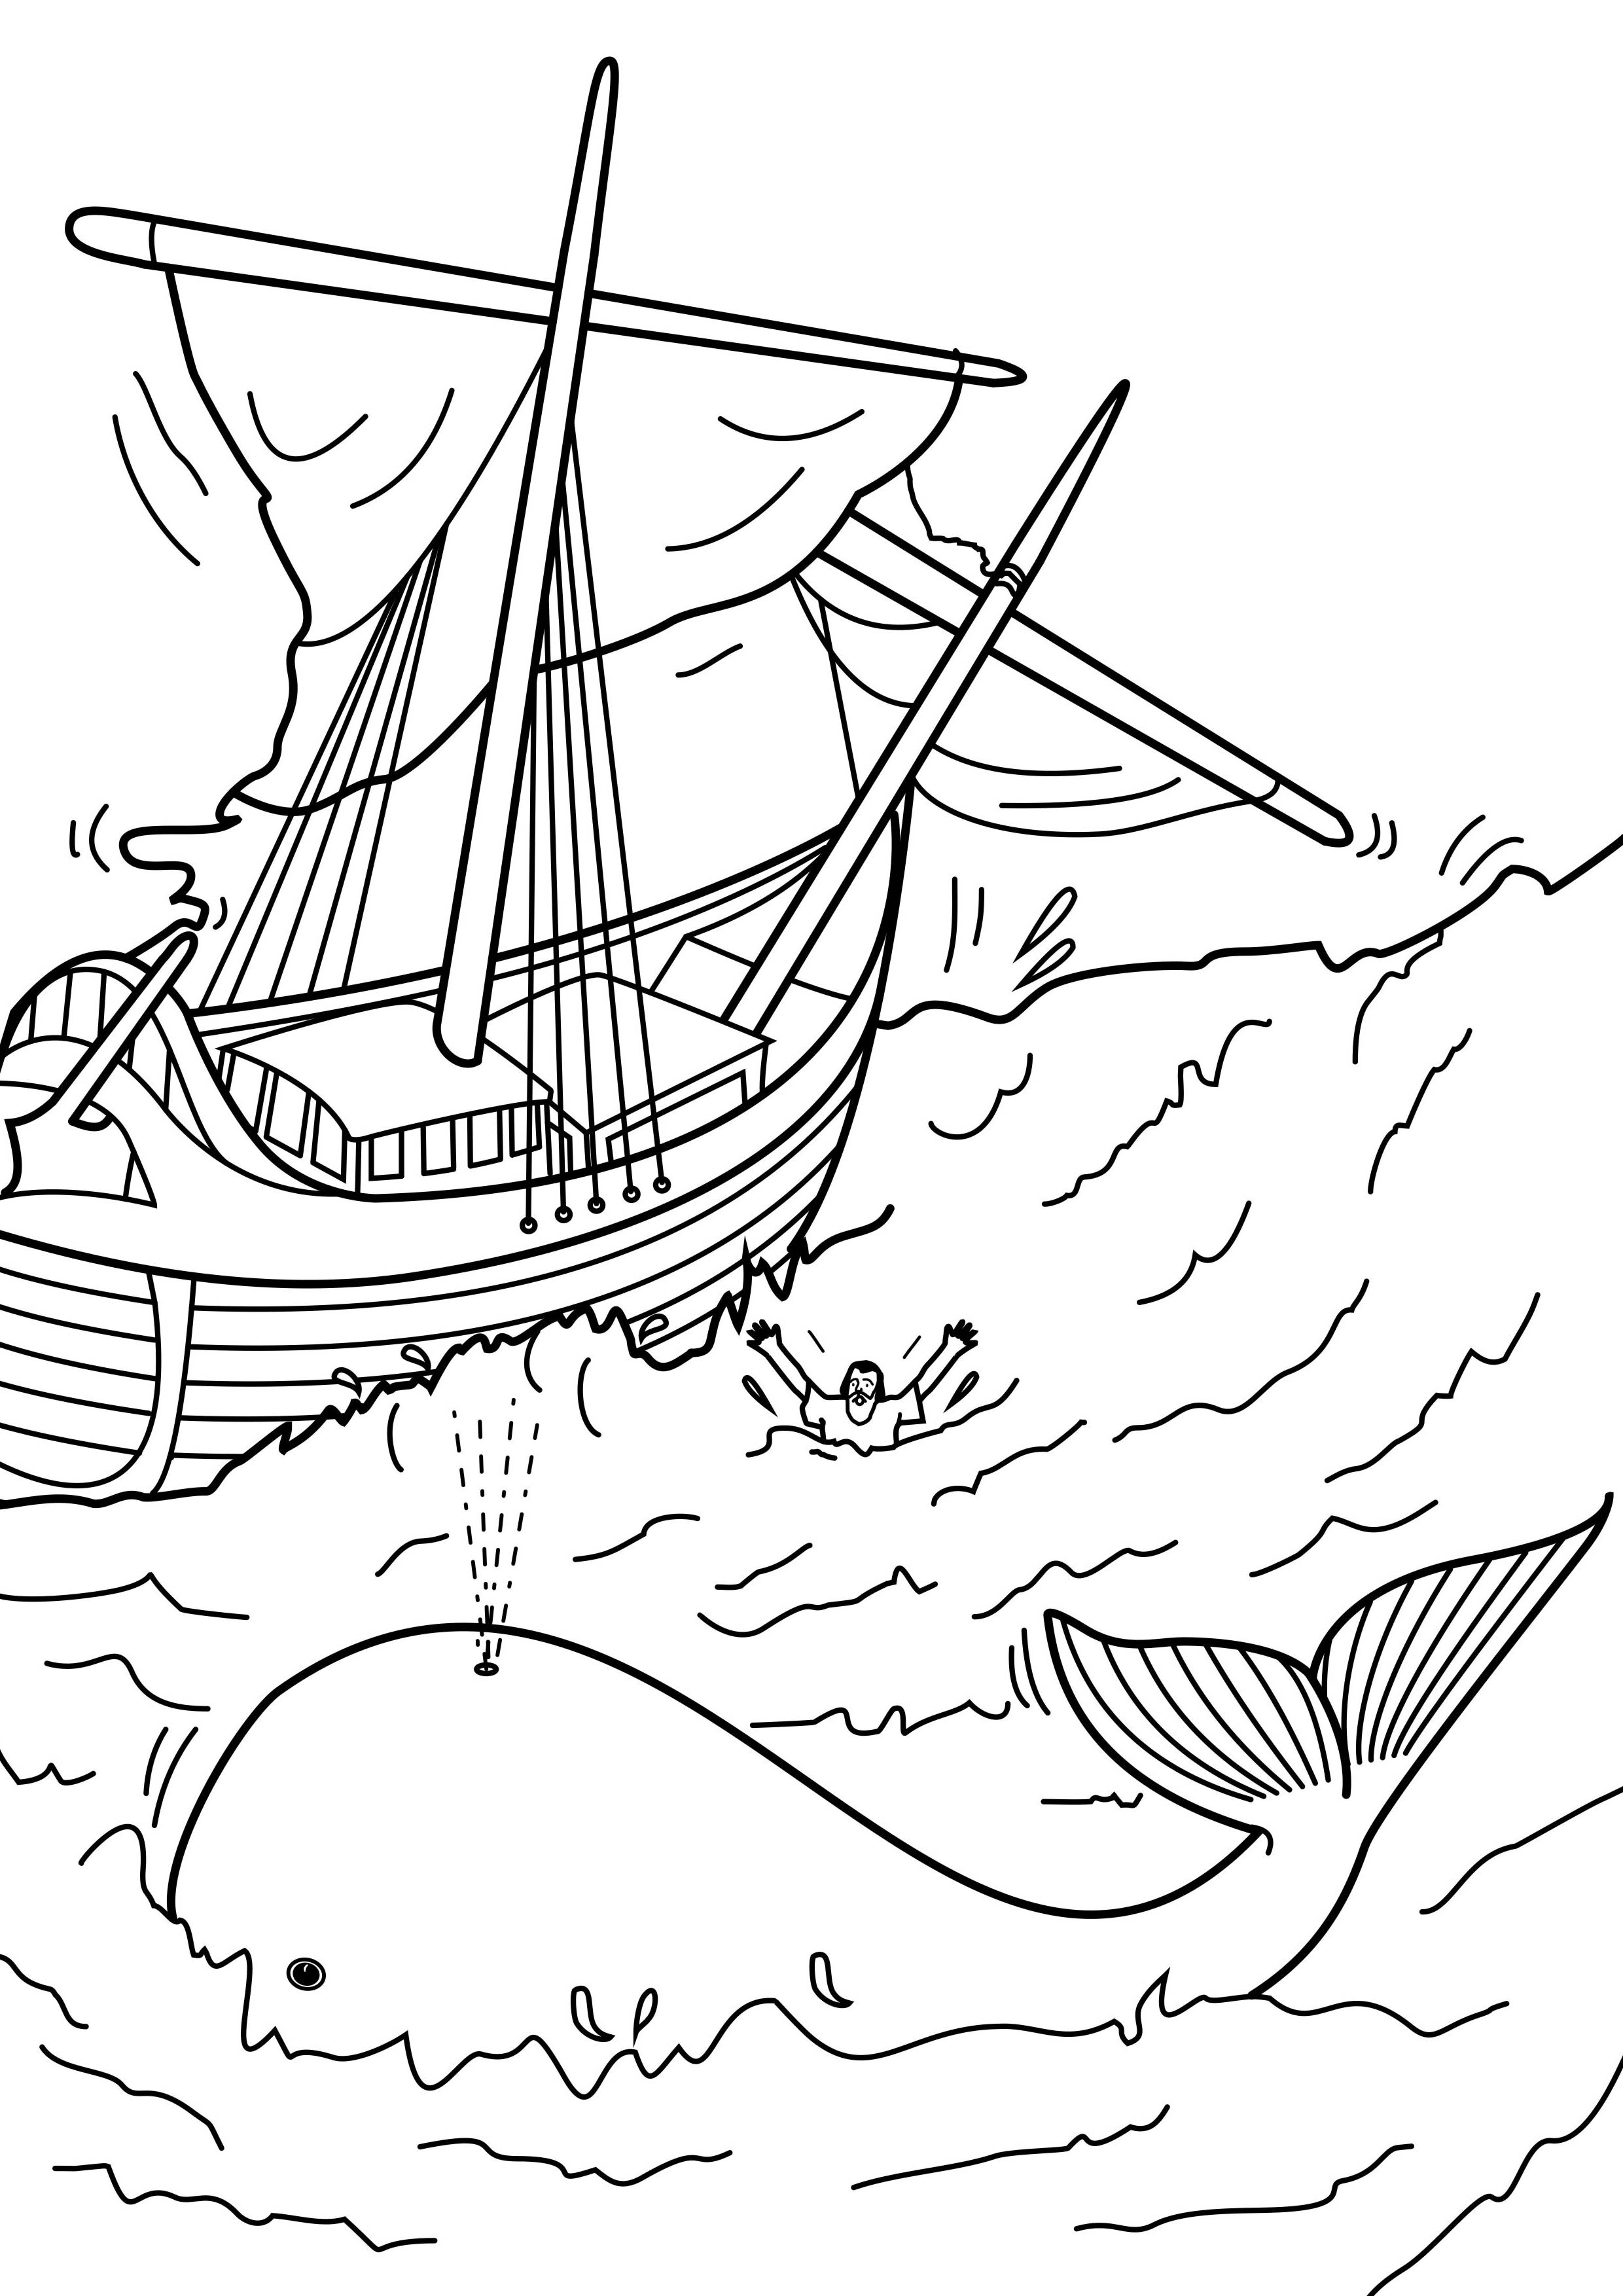 25-inspiration-photo-of-bible-story-coloring-pages-bible-story